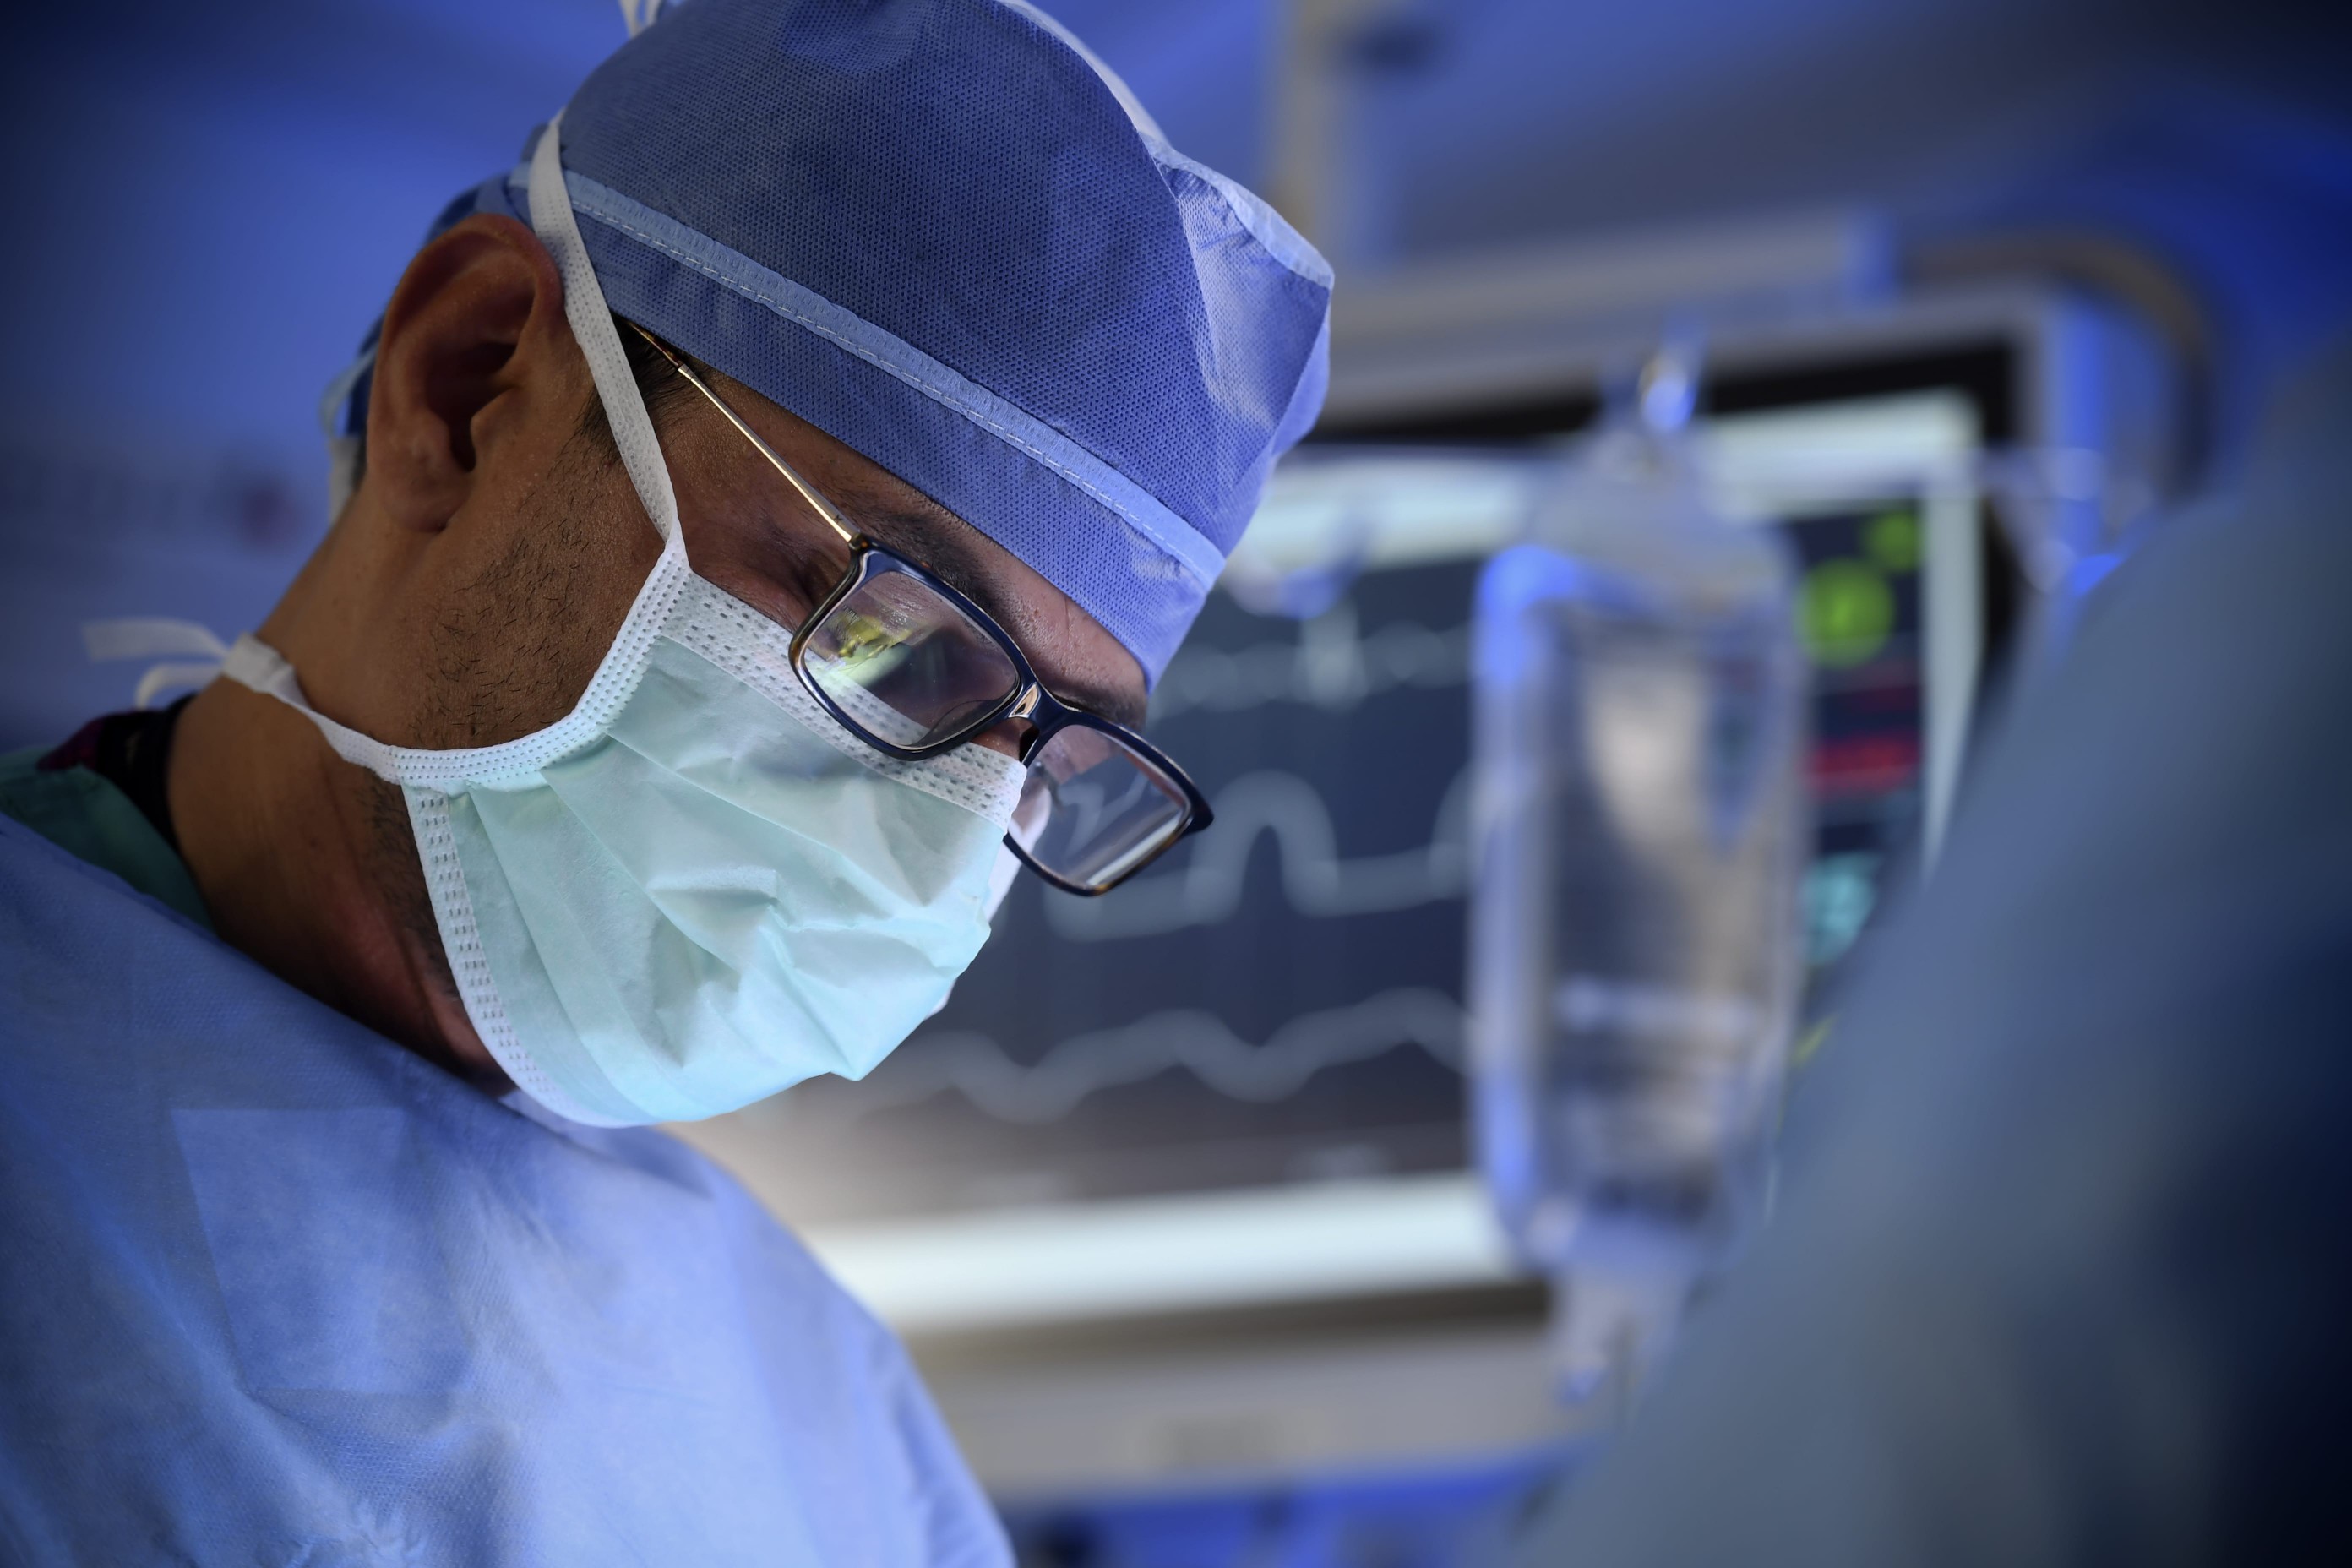 A surgical oncologist in operating attire performs a clinical trial procedure to treat a brain tumor